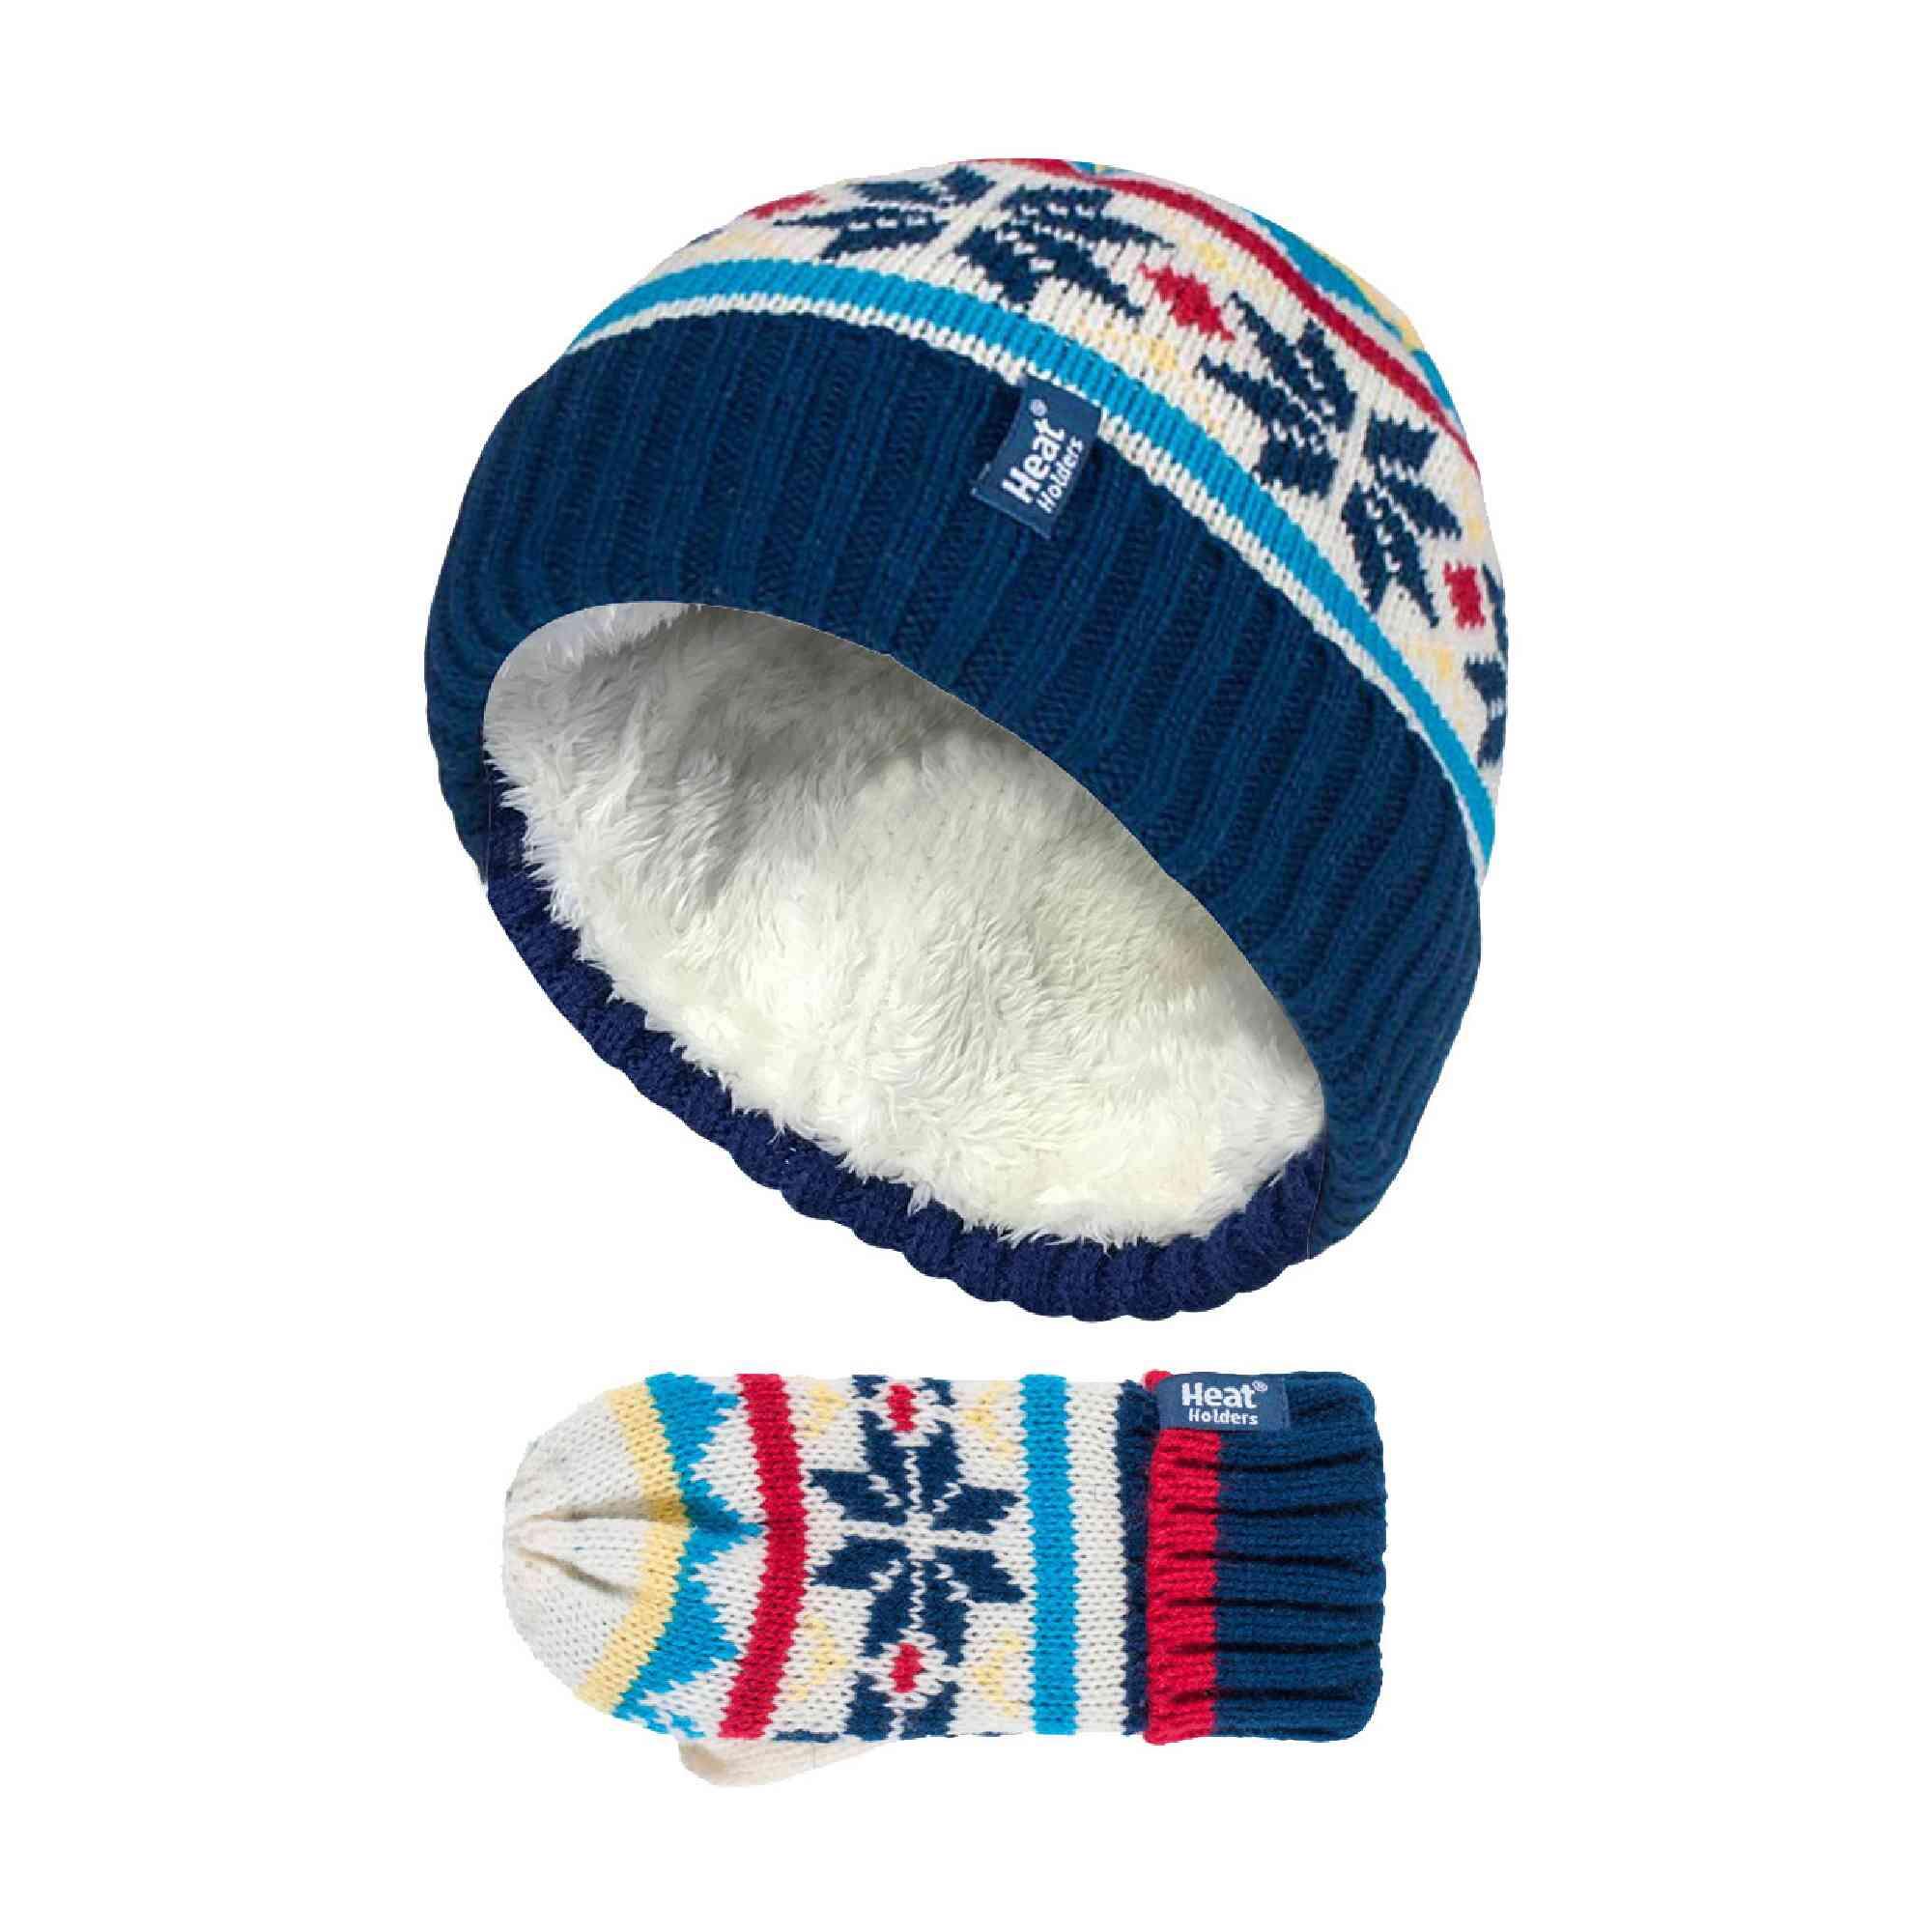 HEAT HOLDERS Kids Boys Winter Knitted Thermal Fleece Lined Cuffed Beanie Hat and Mittens Set